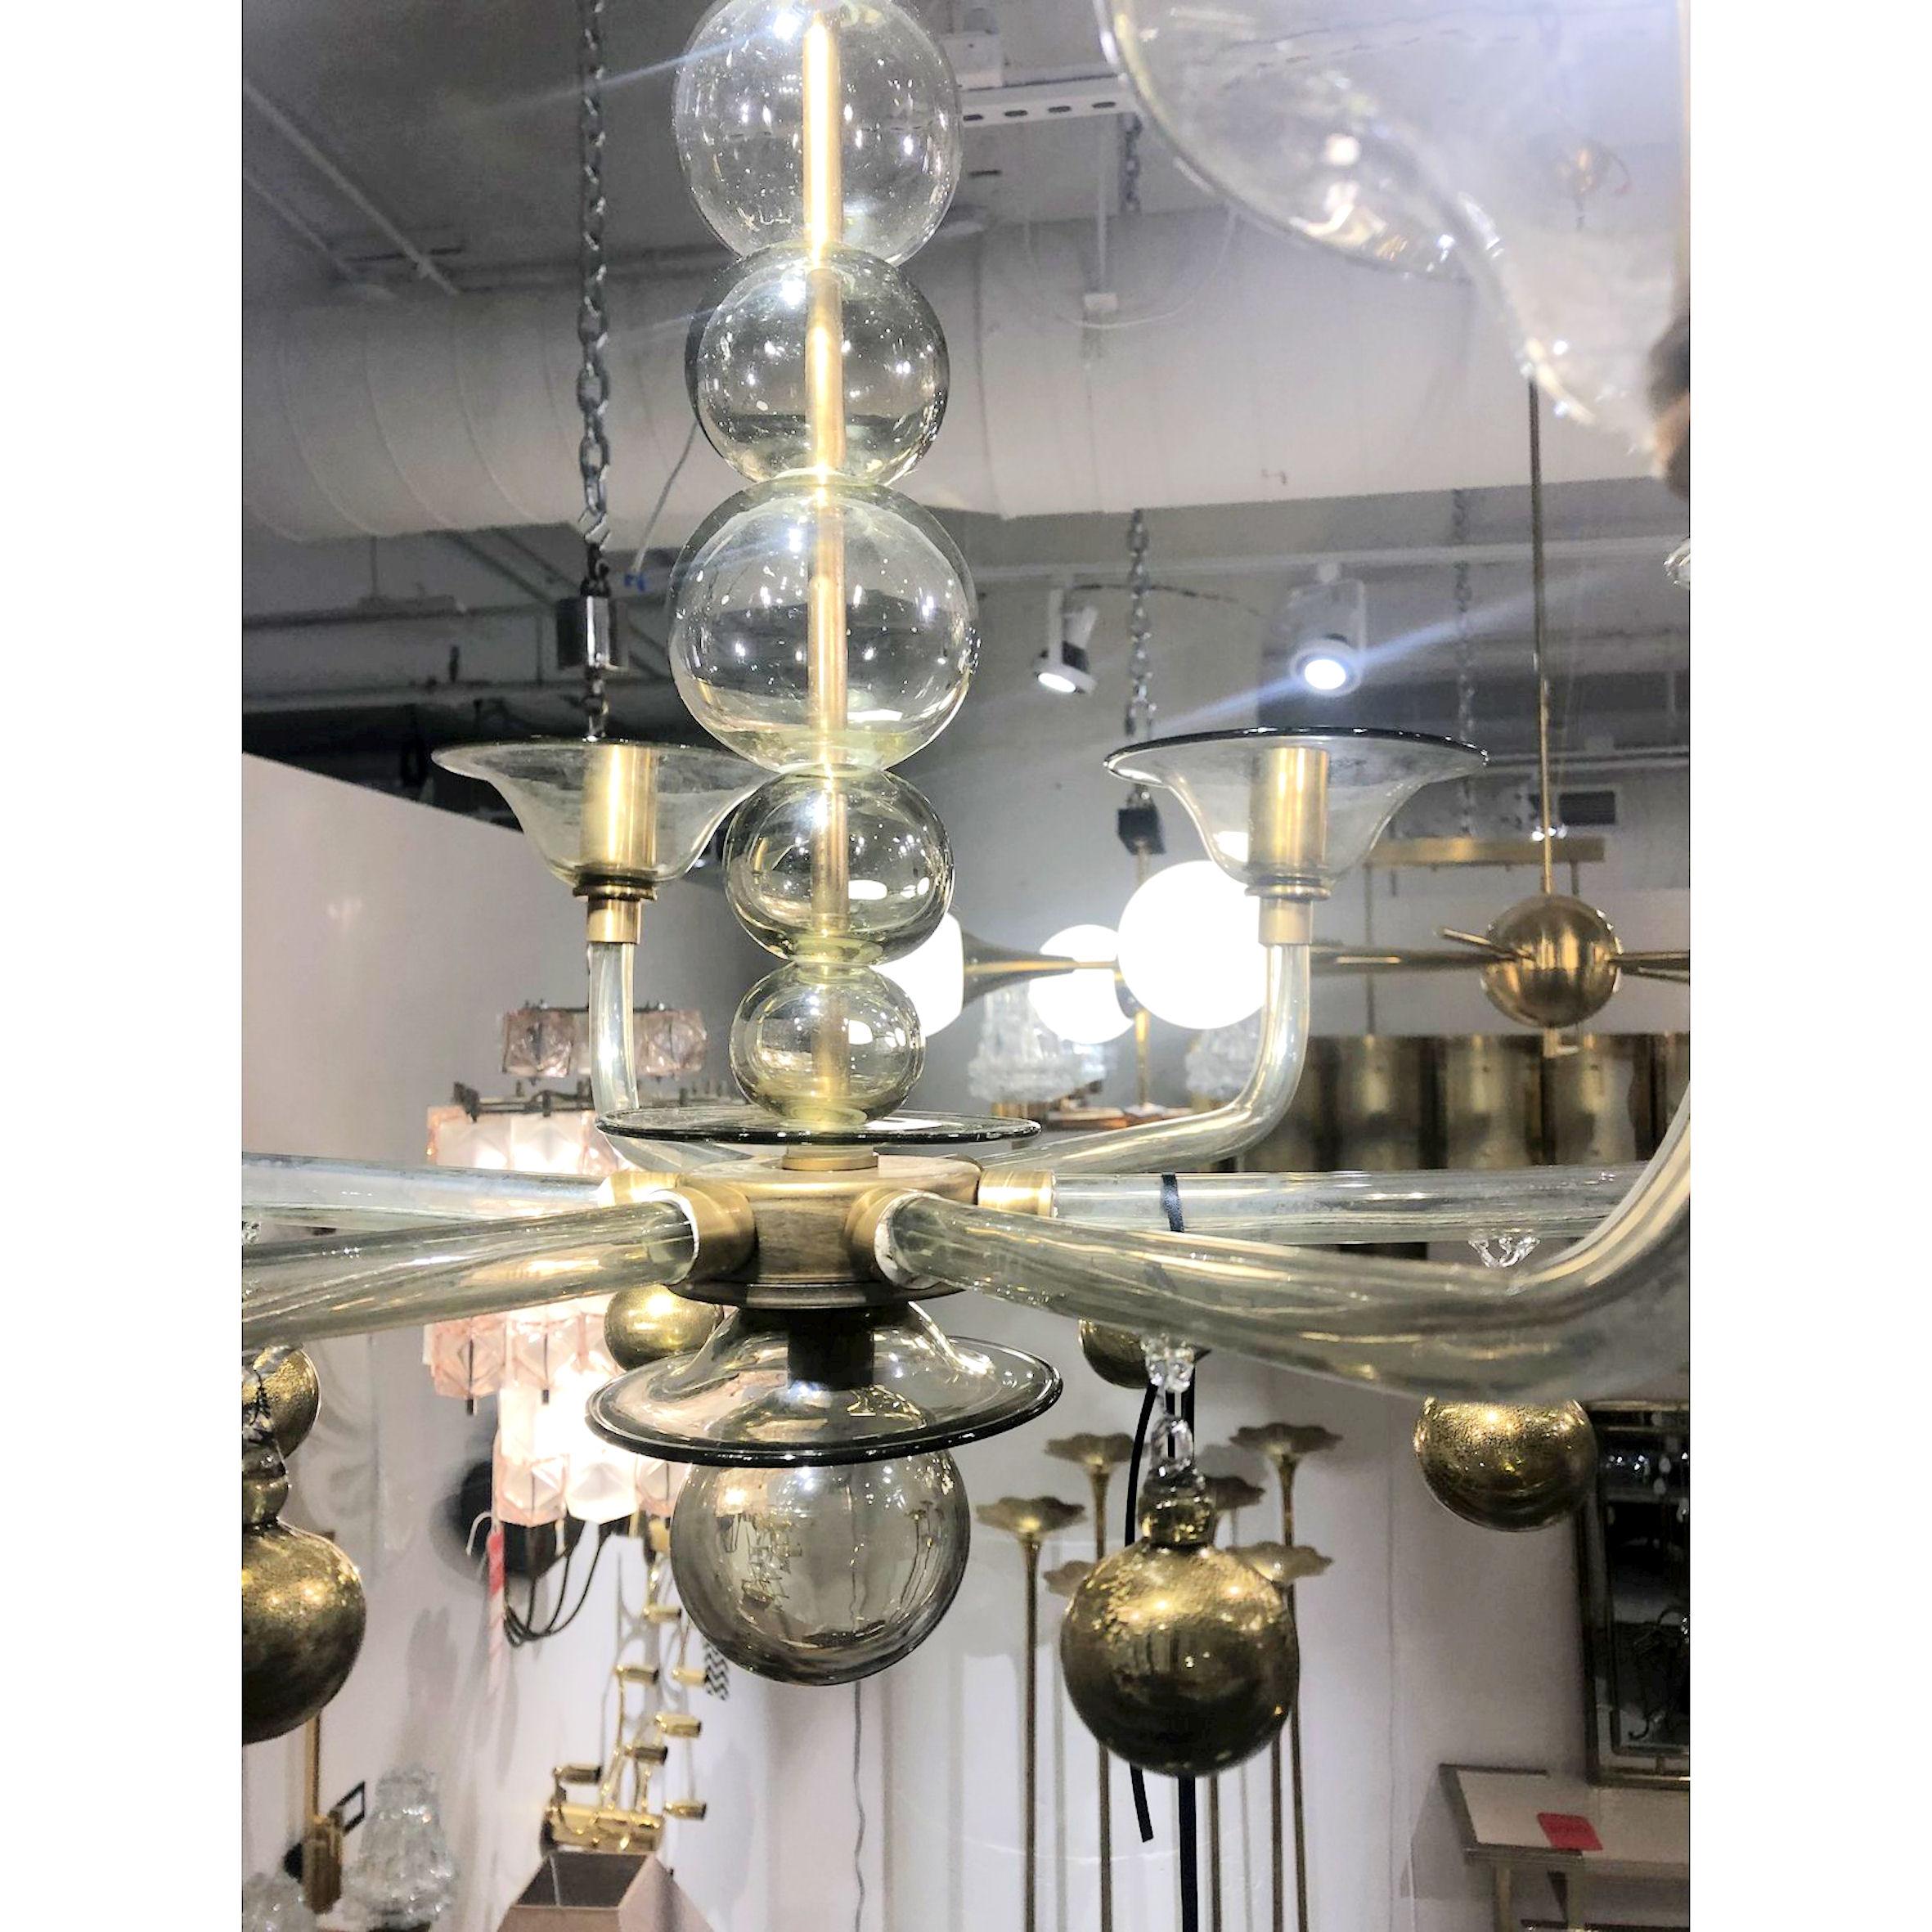 Mid-Century Modern chandelier by Venini, Italy, 1970s. 
Chandelier features six glass arms with hand blown detailing, including round orbs.
The Murano glass has a beautiful transparency, with a light gray color, showing the inside brass mounts,